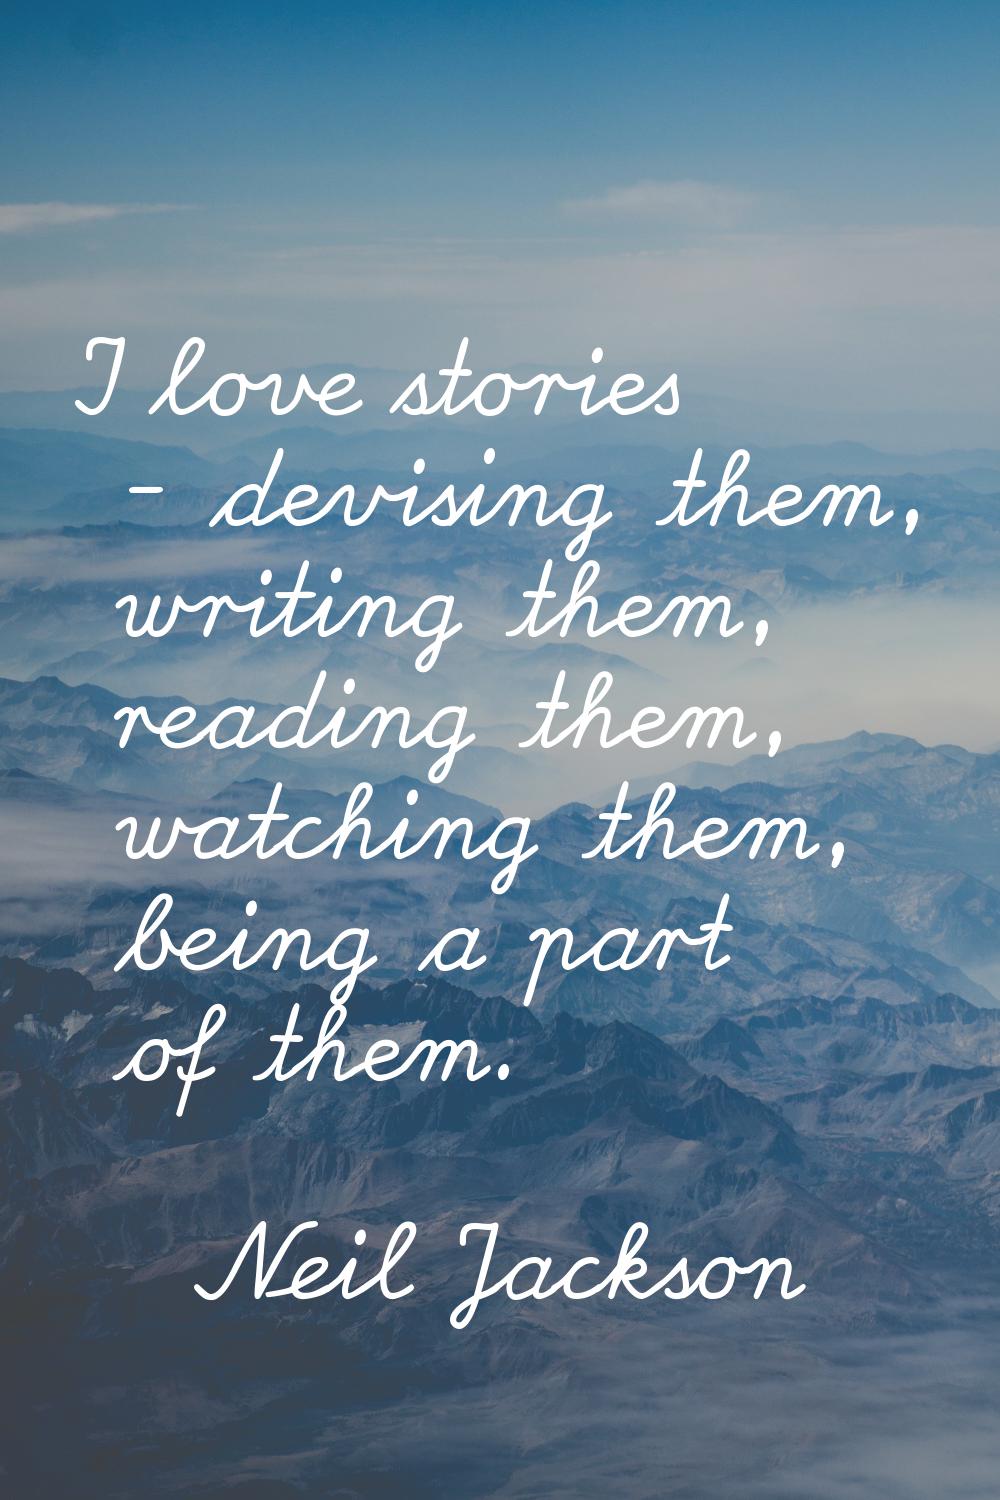 I love stories - devising them, writing them, reading them, watching them, being a part of them.